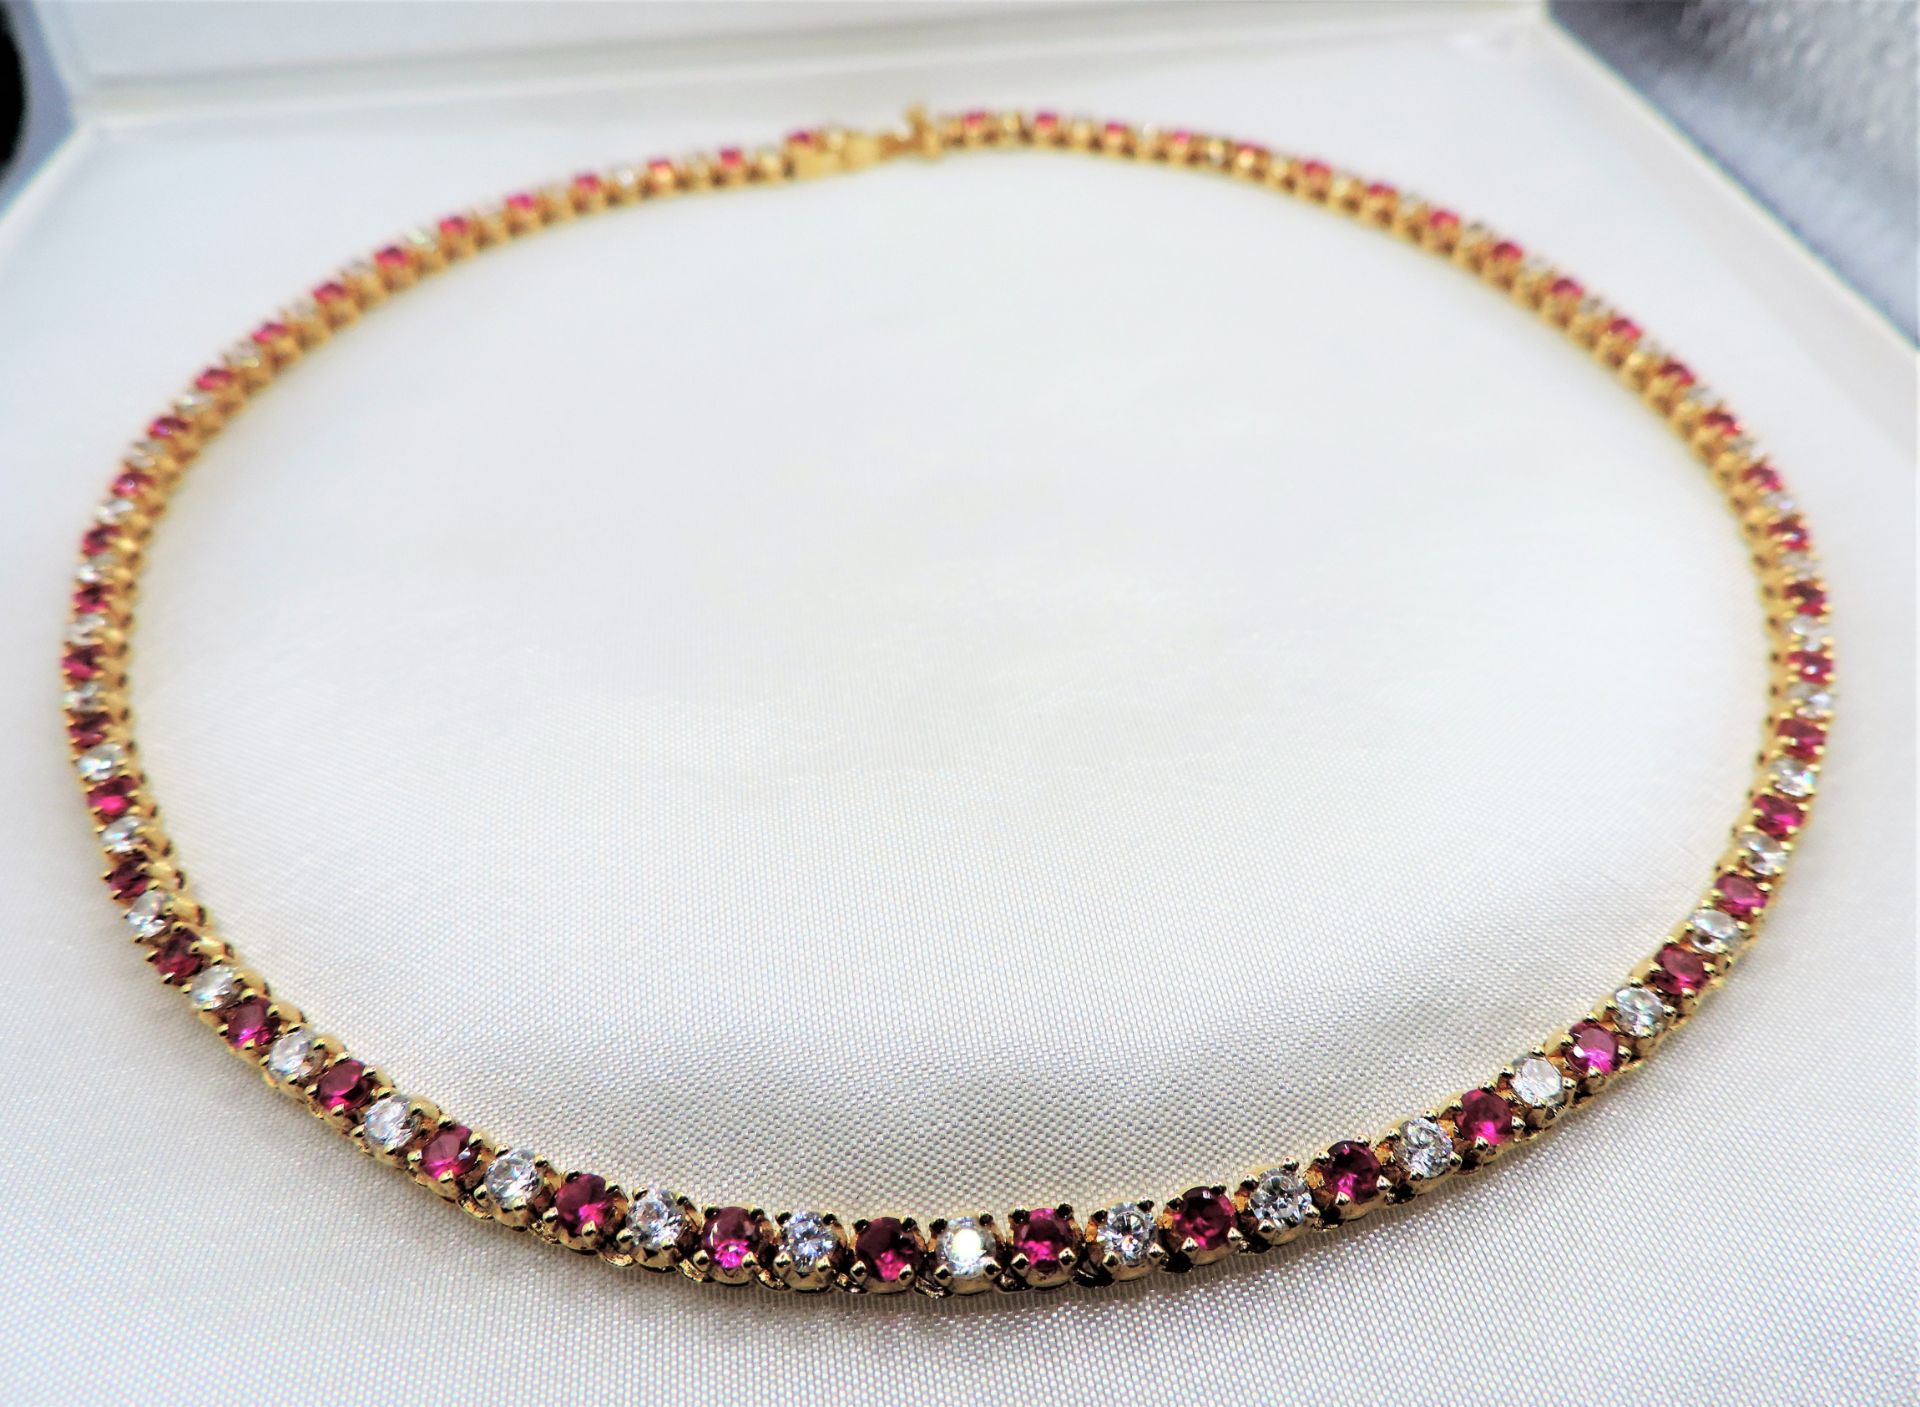 12 carat Gold on Sterling Silver Pink & White Tourmaline Tennis Necklace New with Gift Box - Image 2 of 4